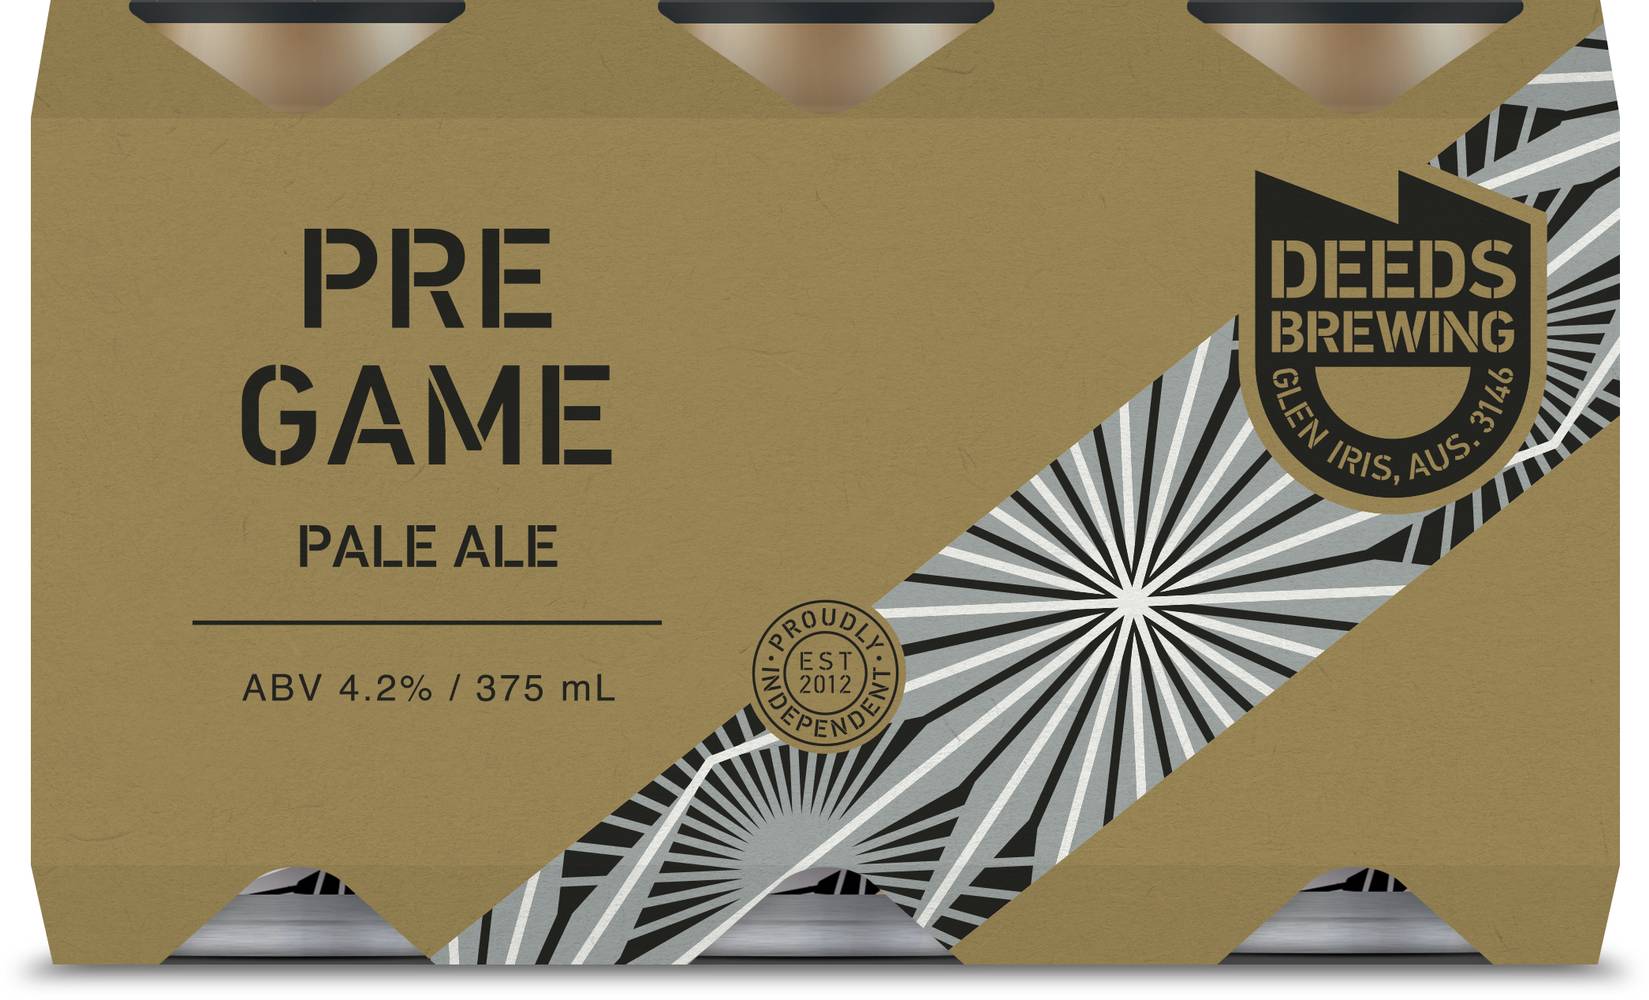 Deeds Brewing Pre Game Pale Ale Can 375mL X 4 pack